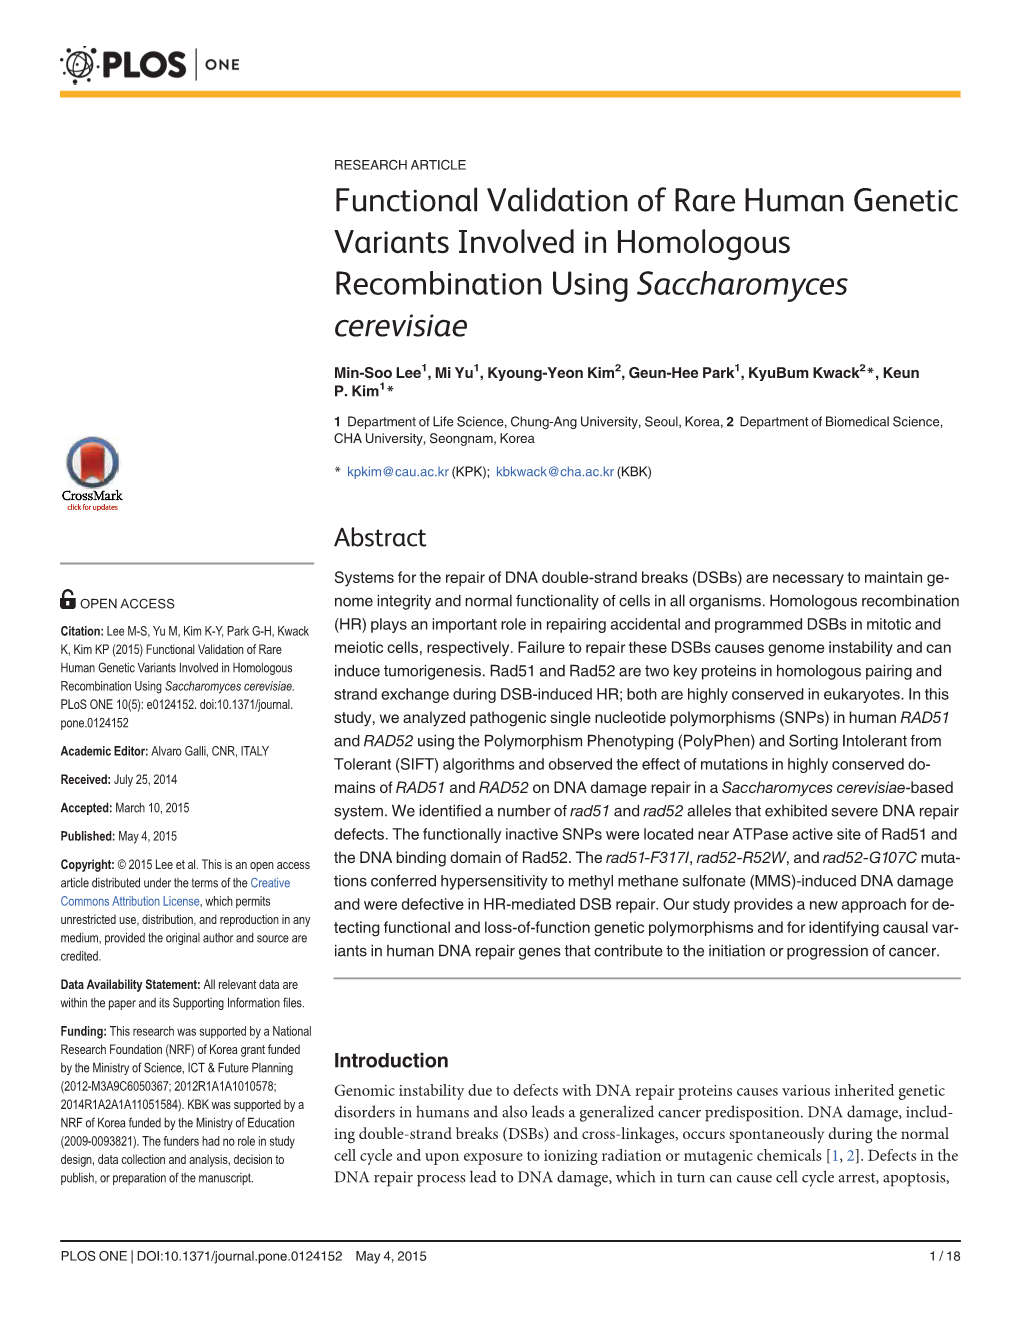 Functional Validation of Rare Human Genetic Variants Involved in Homologous Recombination Using Saccharomyces Cerevisiae